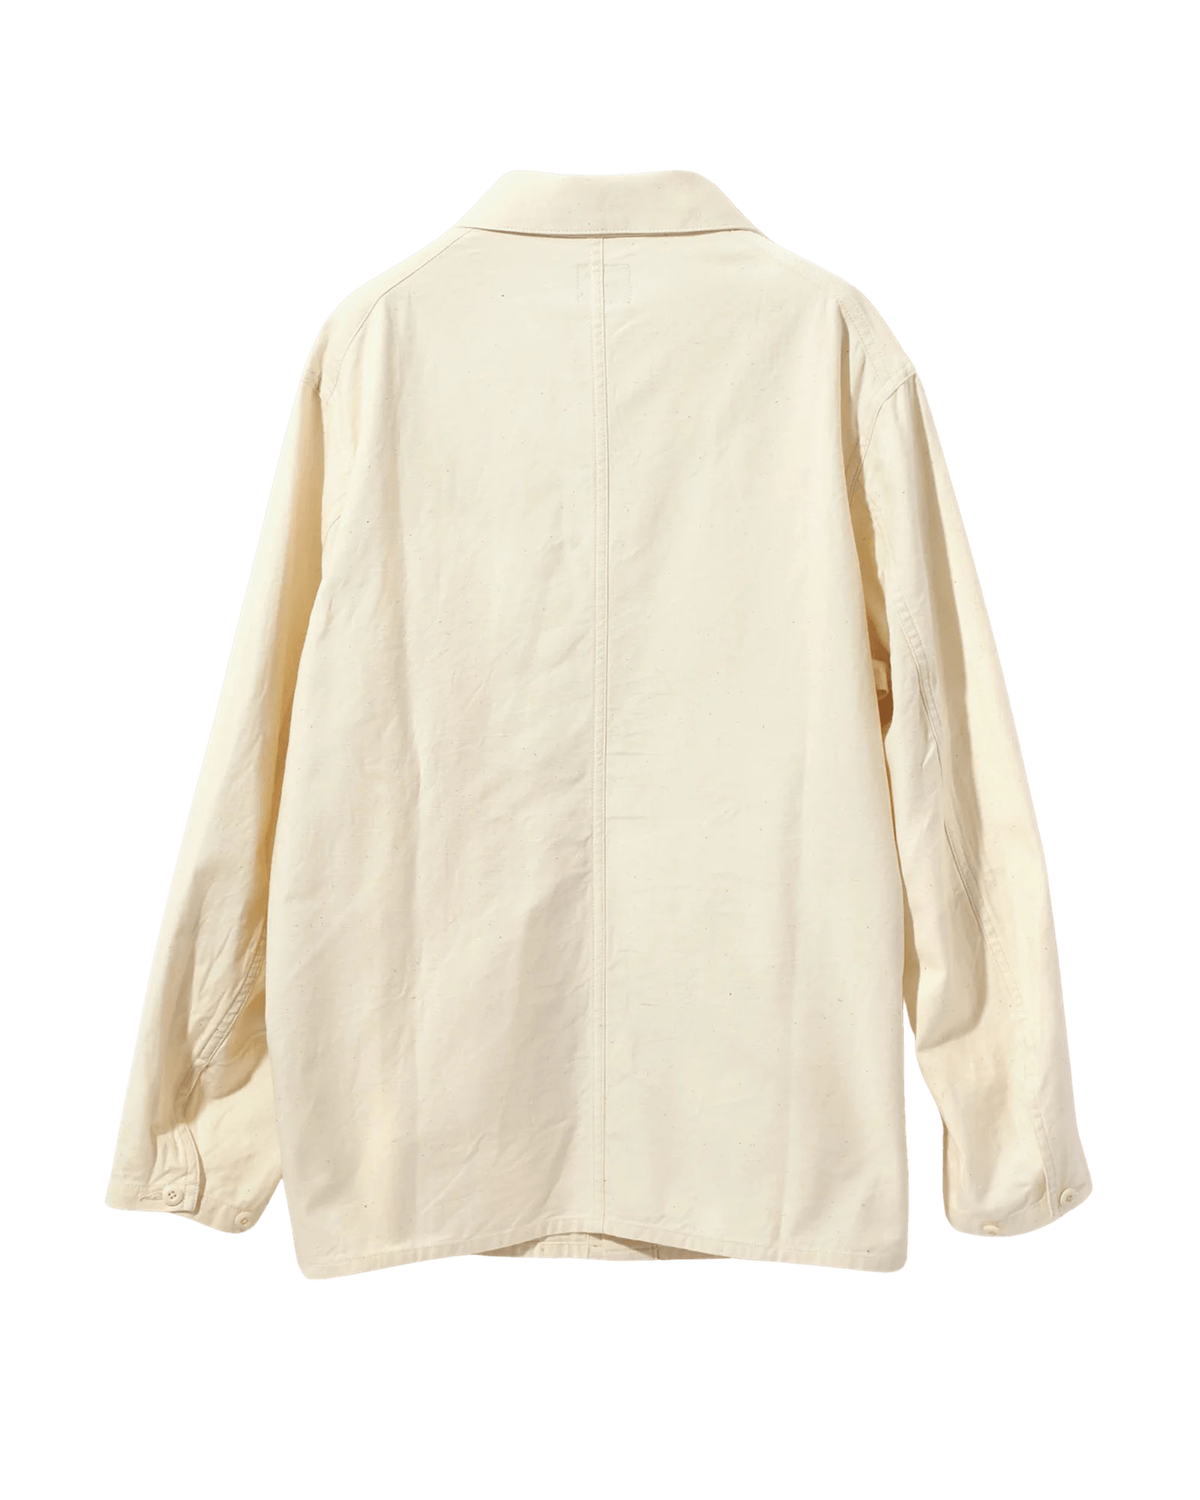 D.N Coverall $259 Needles Tops Shirts White